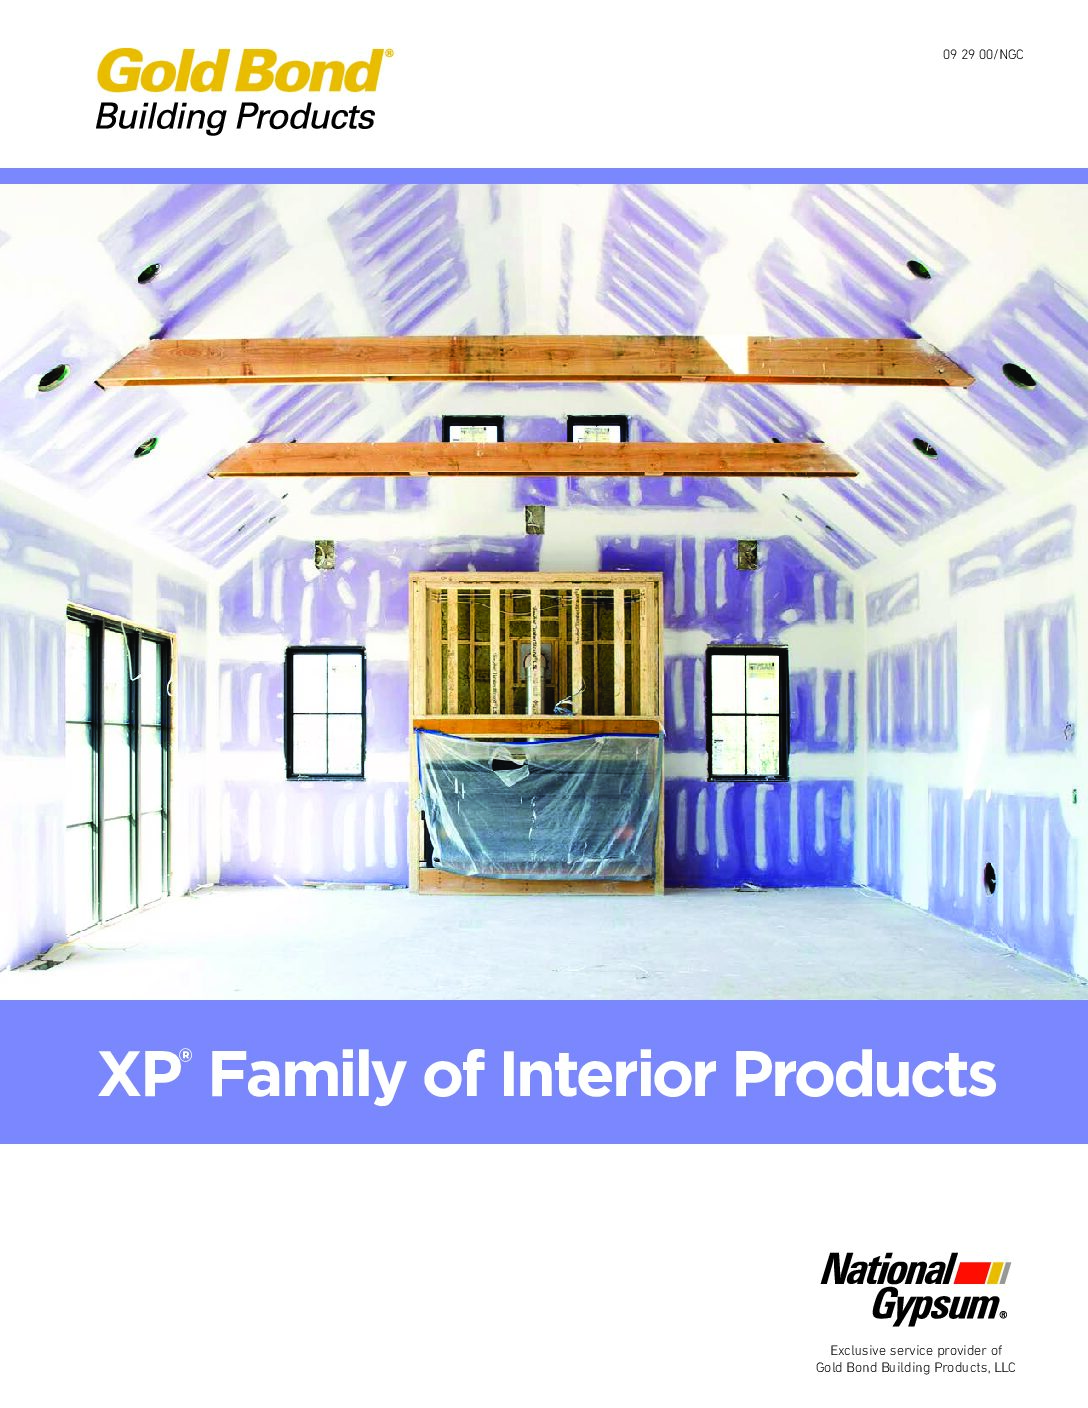 Gold Bond XP High Strength Family of Interior Products Brochure - Document Screen Grab